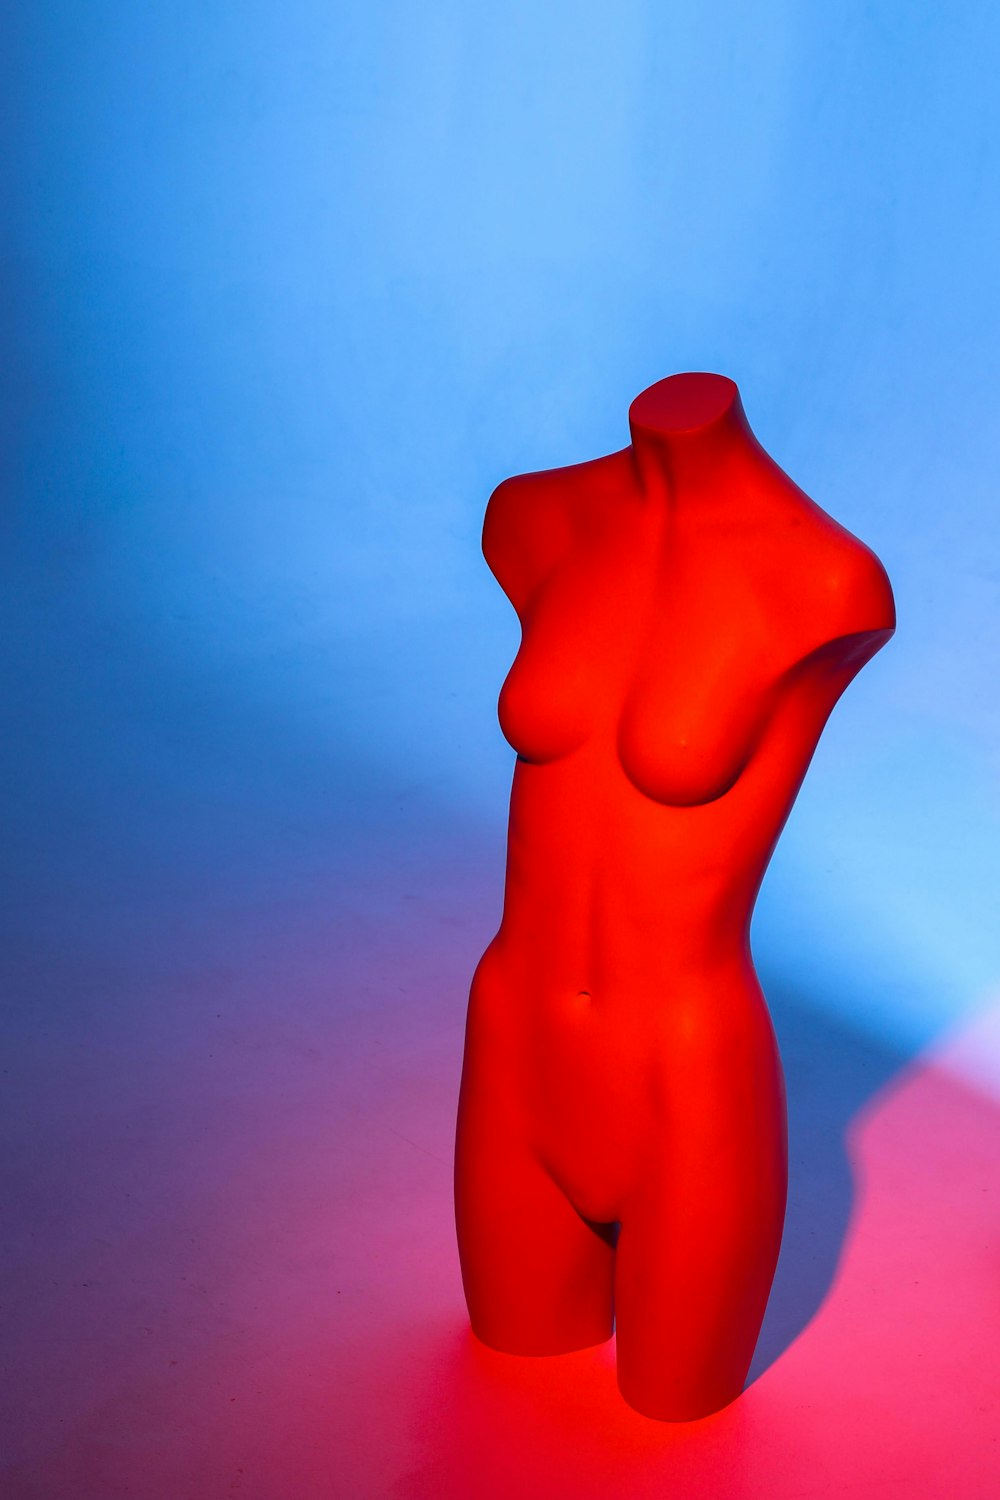 red human body figurine on white surface